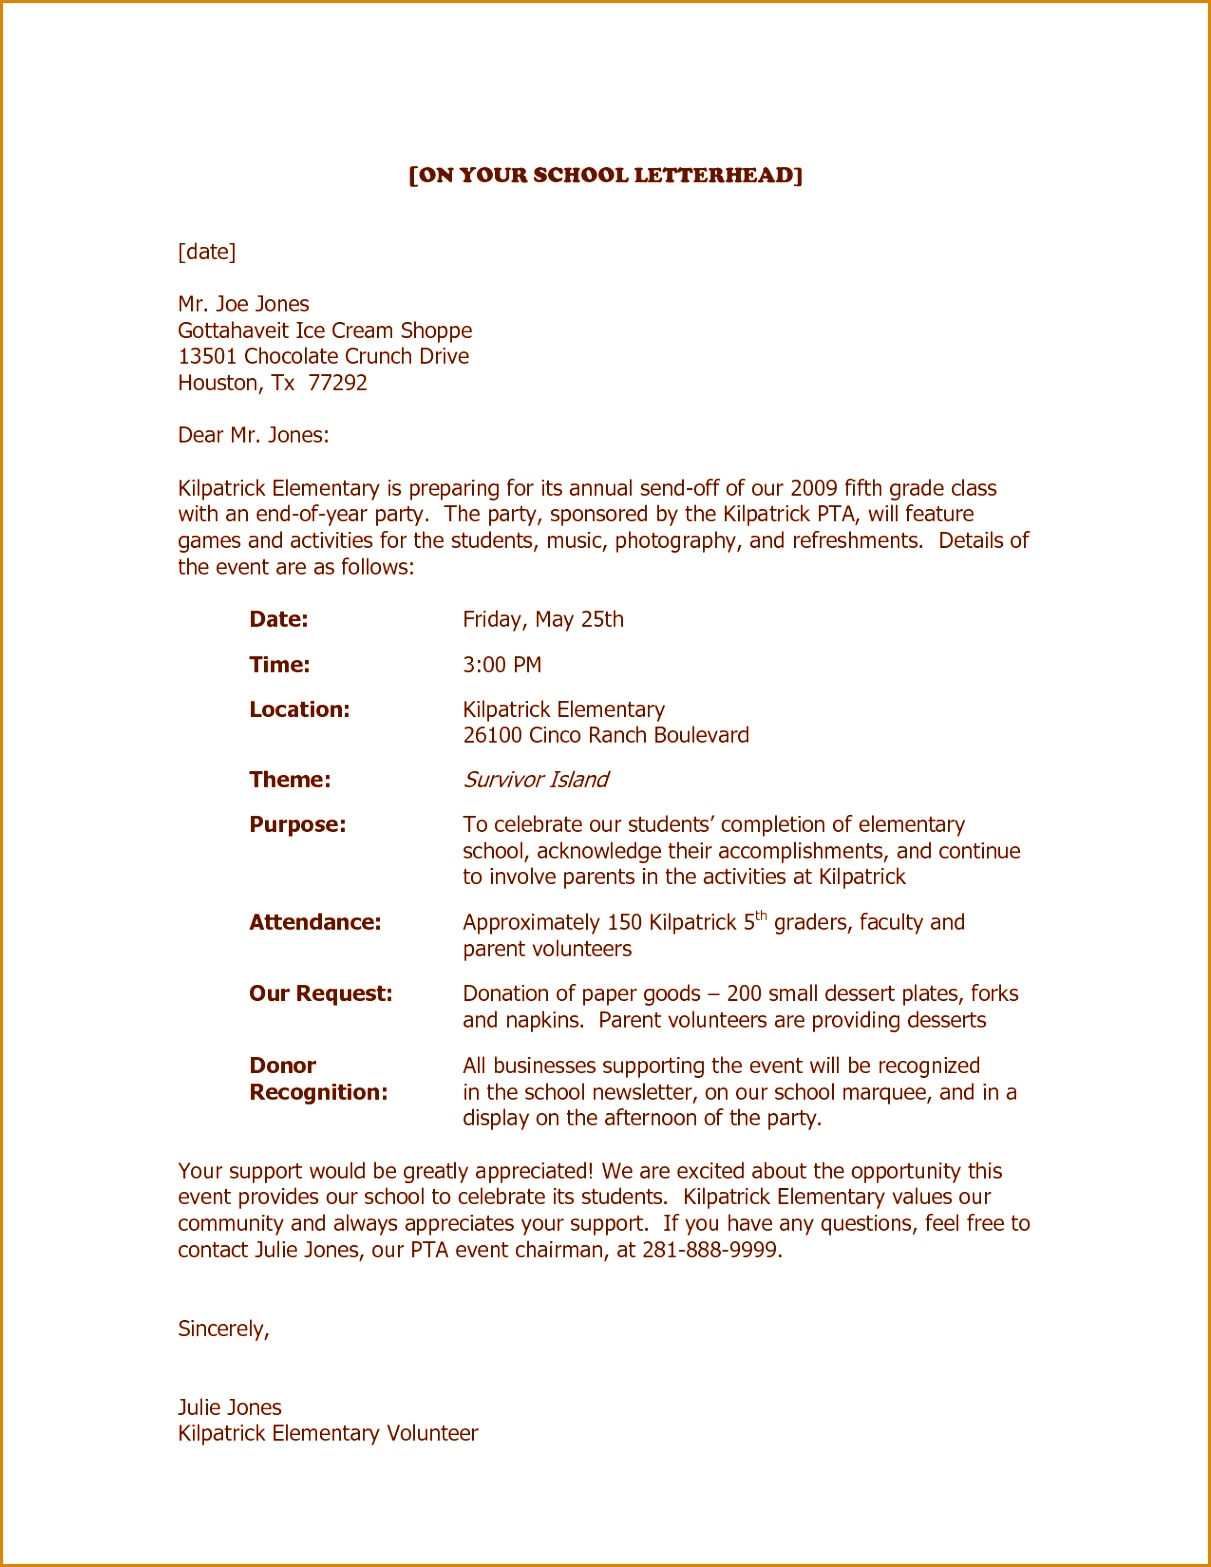 Request for Donations Letter Template Free - 9 Letter for Donations From Businesses Besttemplates Besttemplates